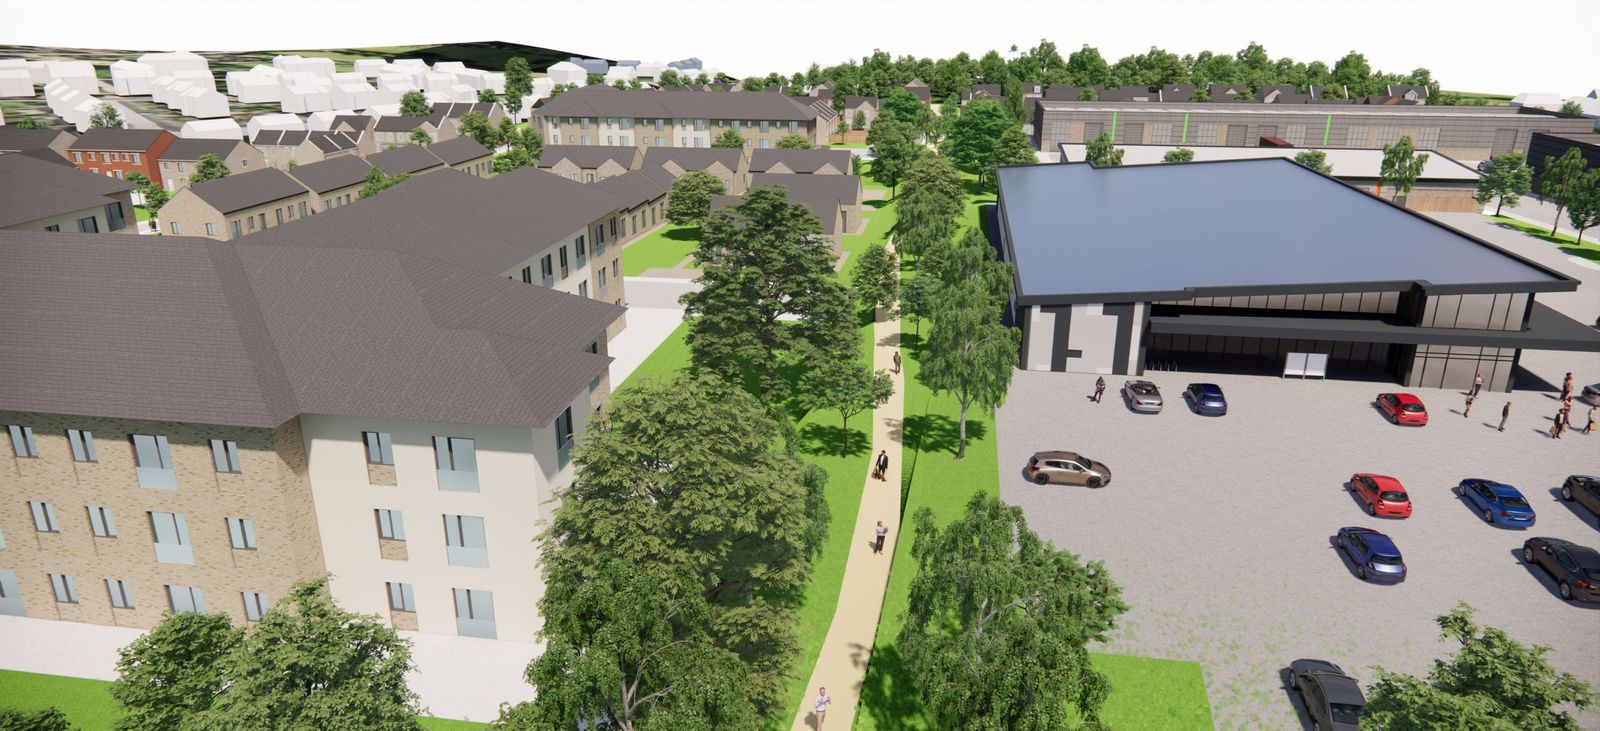 Crosslee Park to deliver £10.7m of economic value